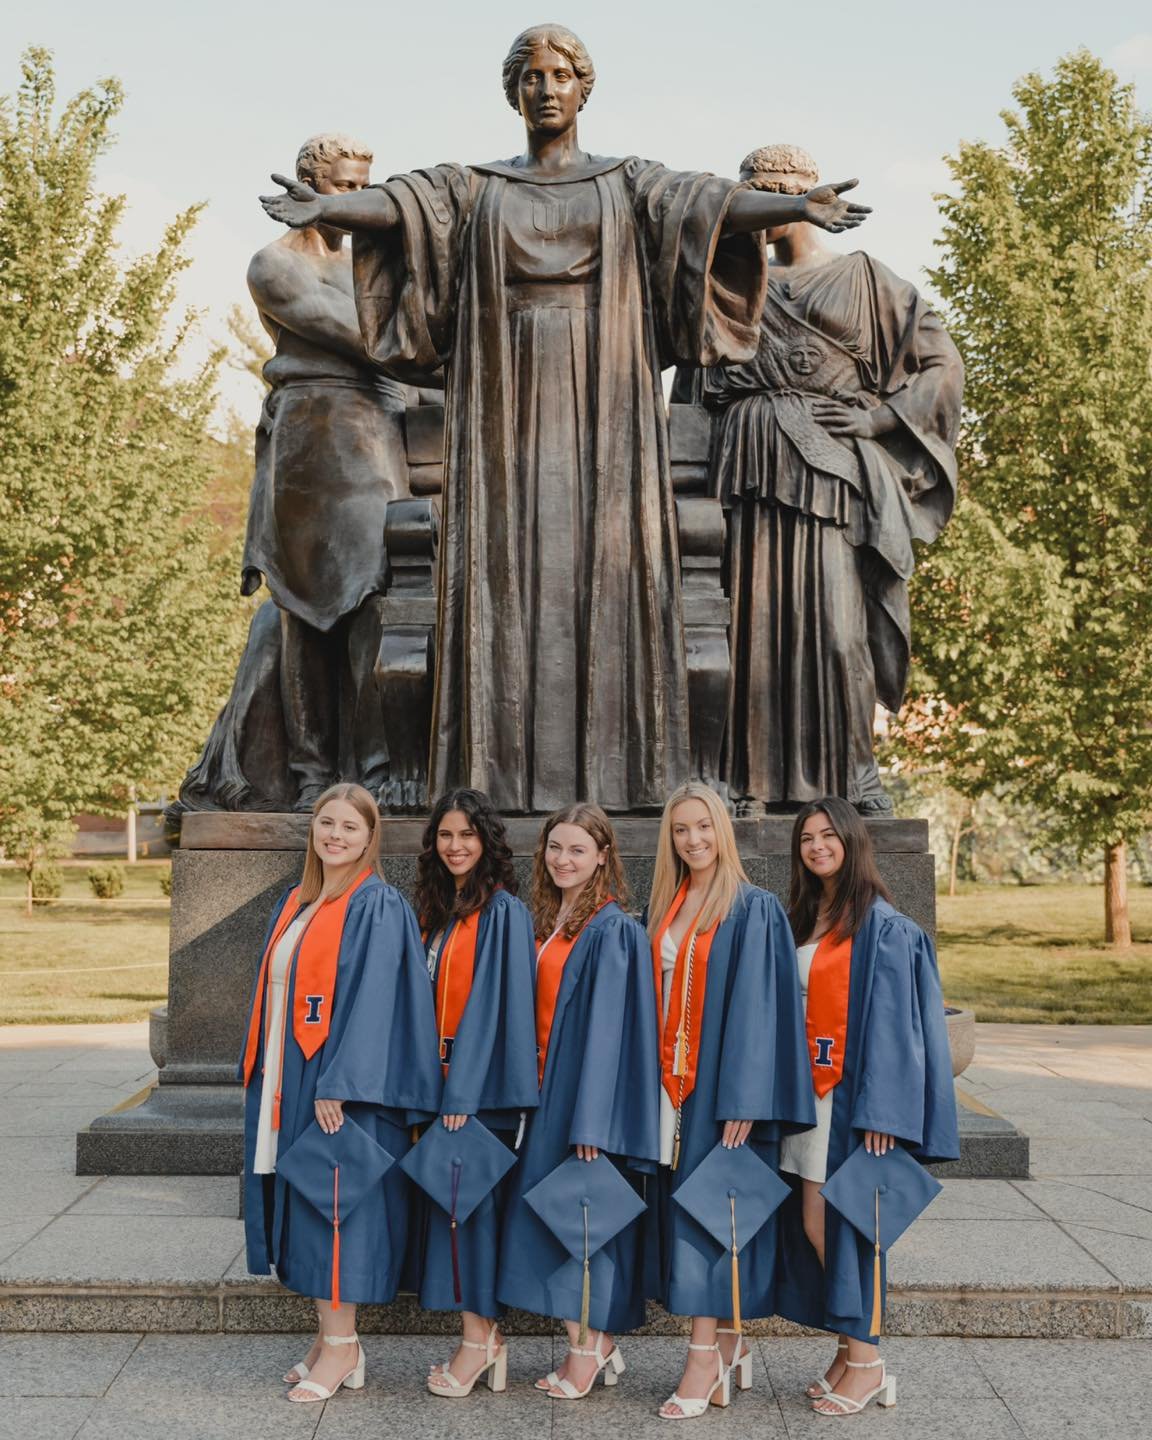 Thank you to Dani, Emily, Demi, Elizabeth, and Jenna for allowing me to take your senior photos for your upcoming graduation from the University of Illinois.

Congratulations to the class of 2024, and good luck in your future endeavors.

#photoofthed